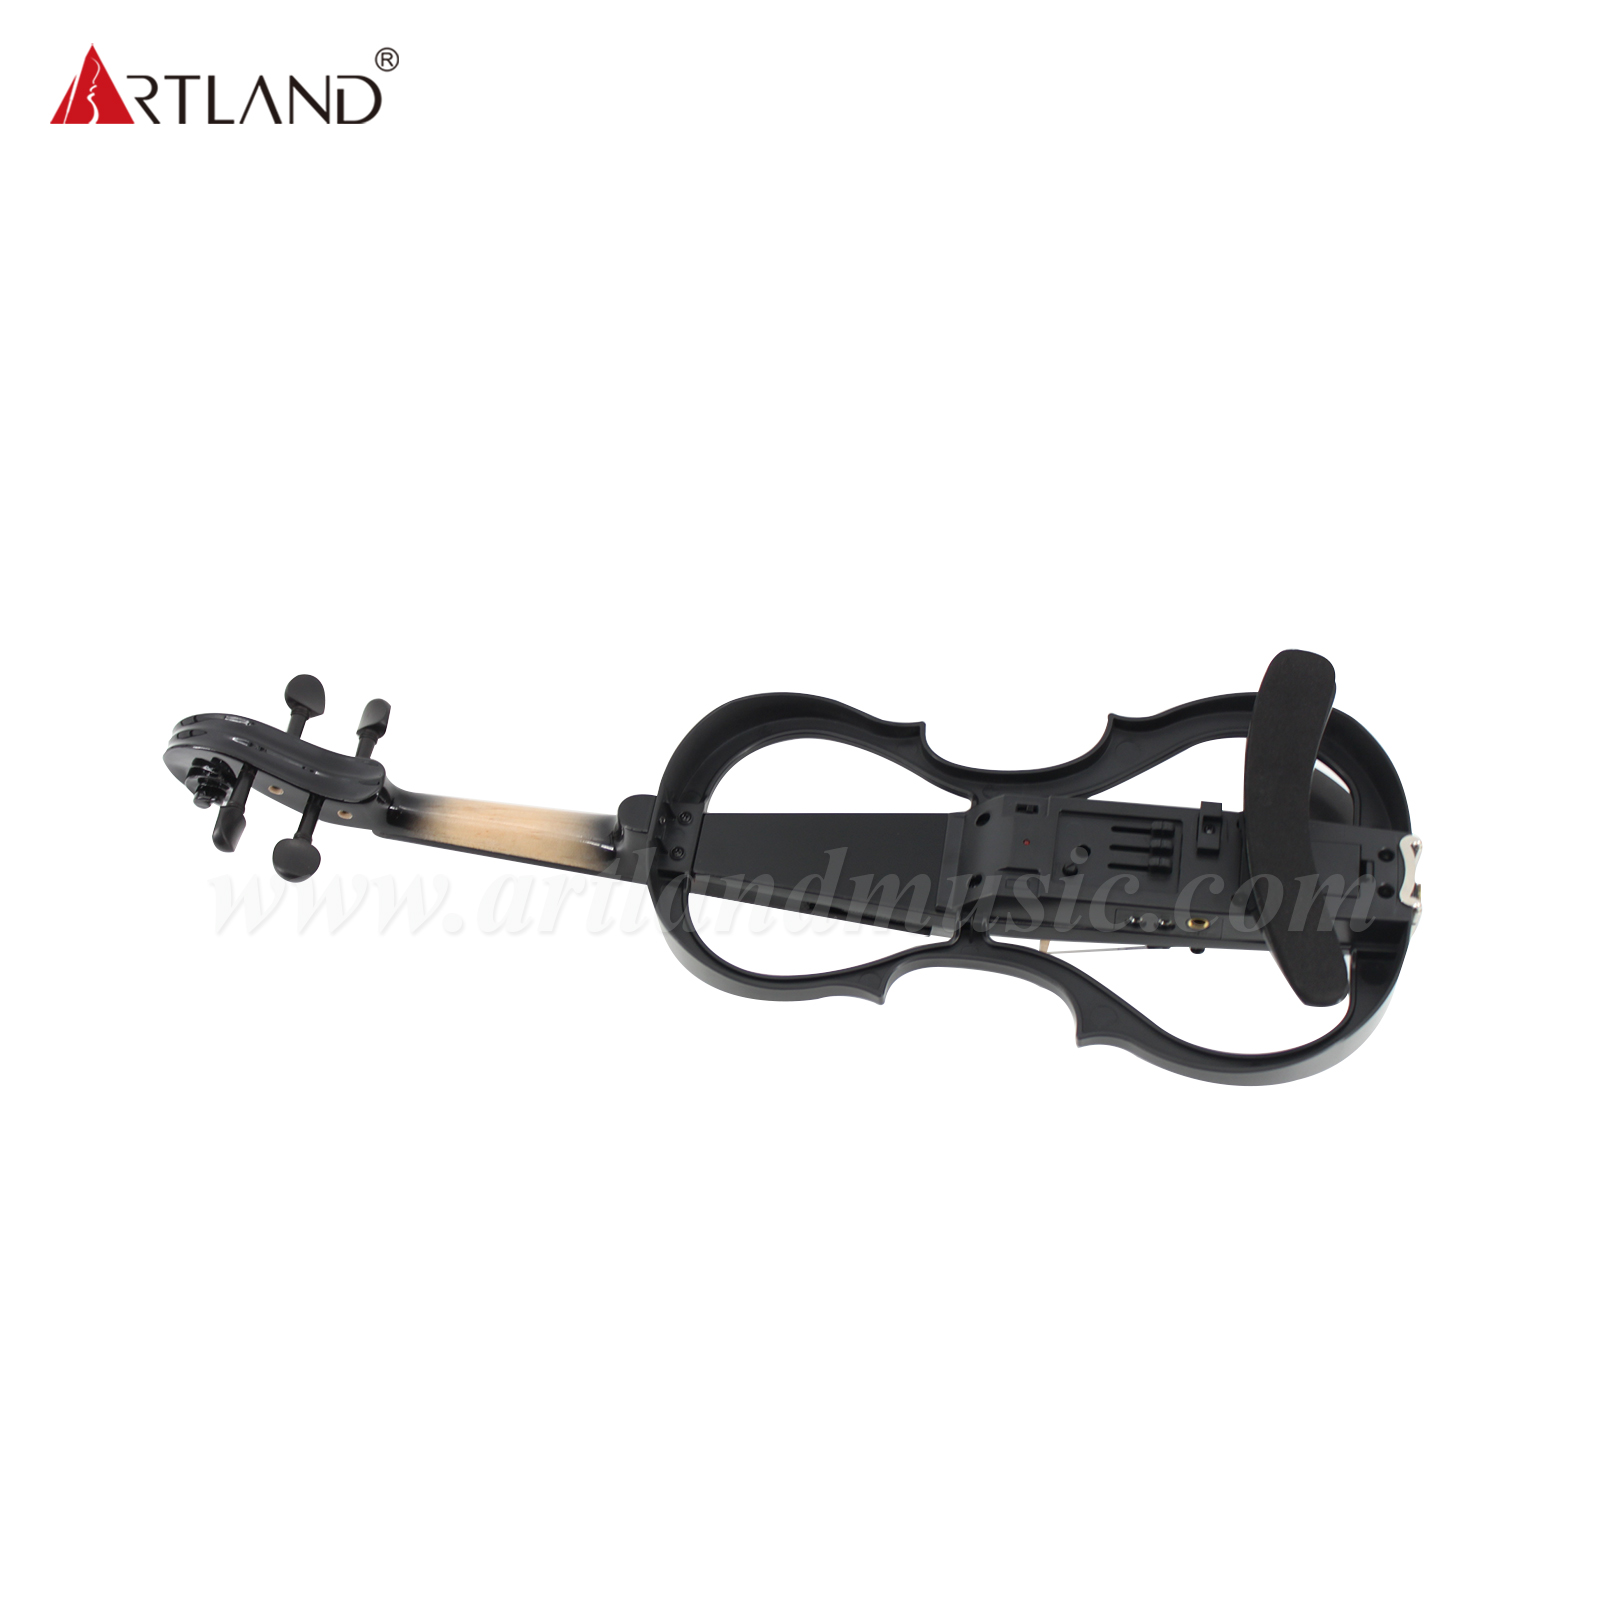 Full Frame Hollow-out Electric Violin (EV116)